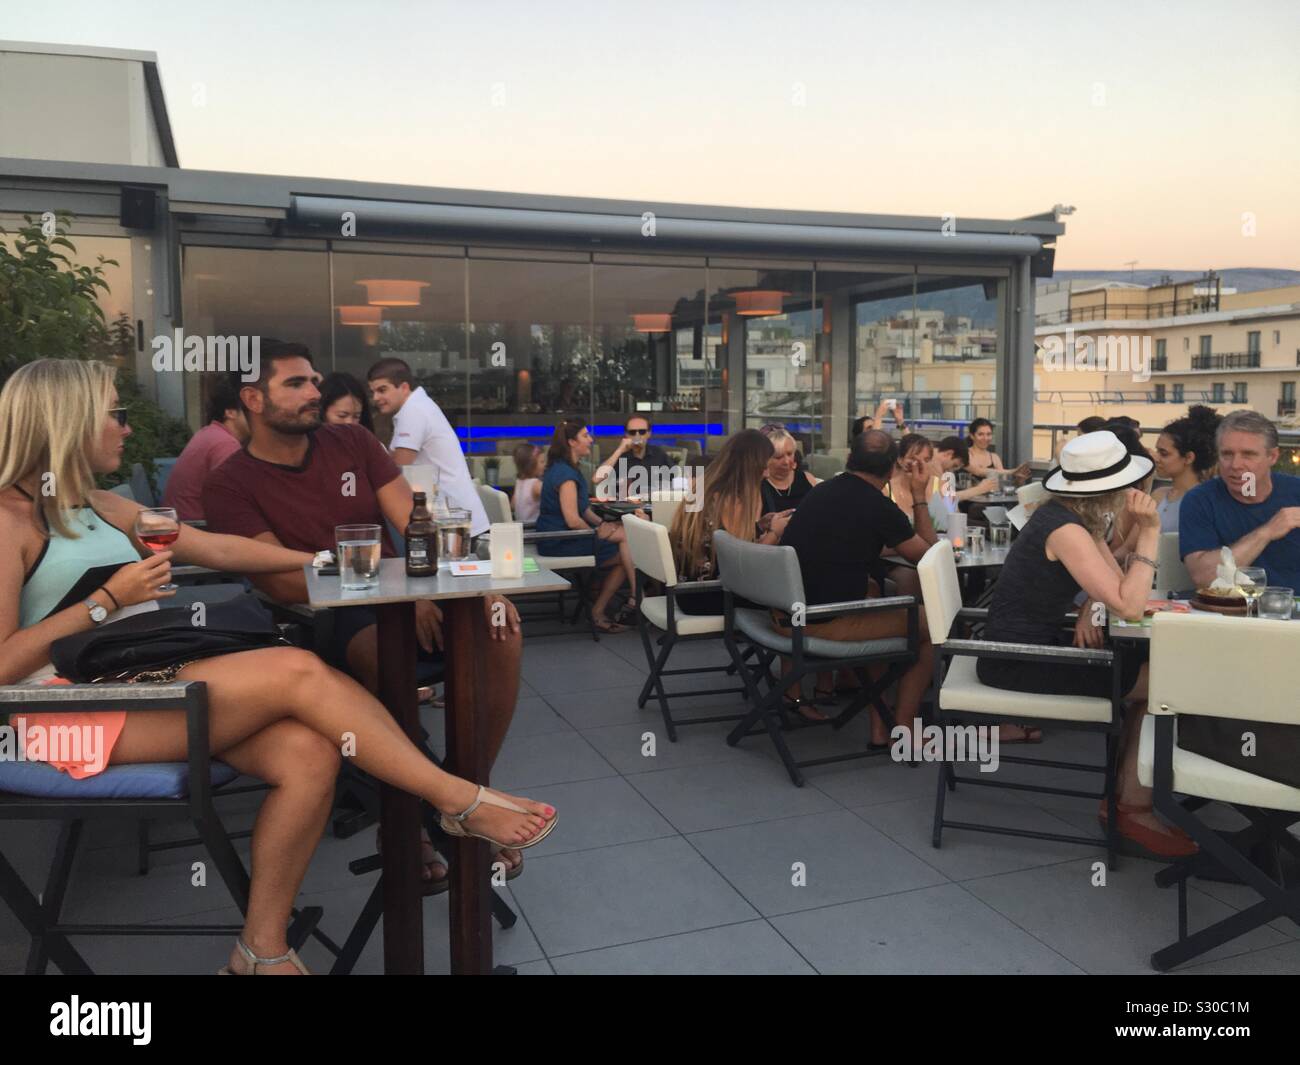 The Rooftop Bar At The Central Hotel In Athens Greece Stock Photo Alamy